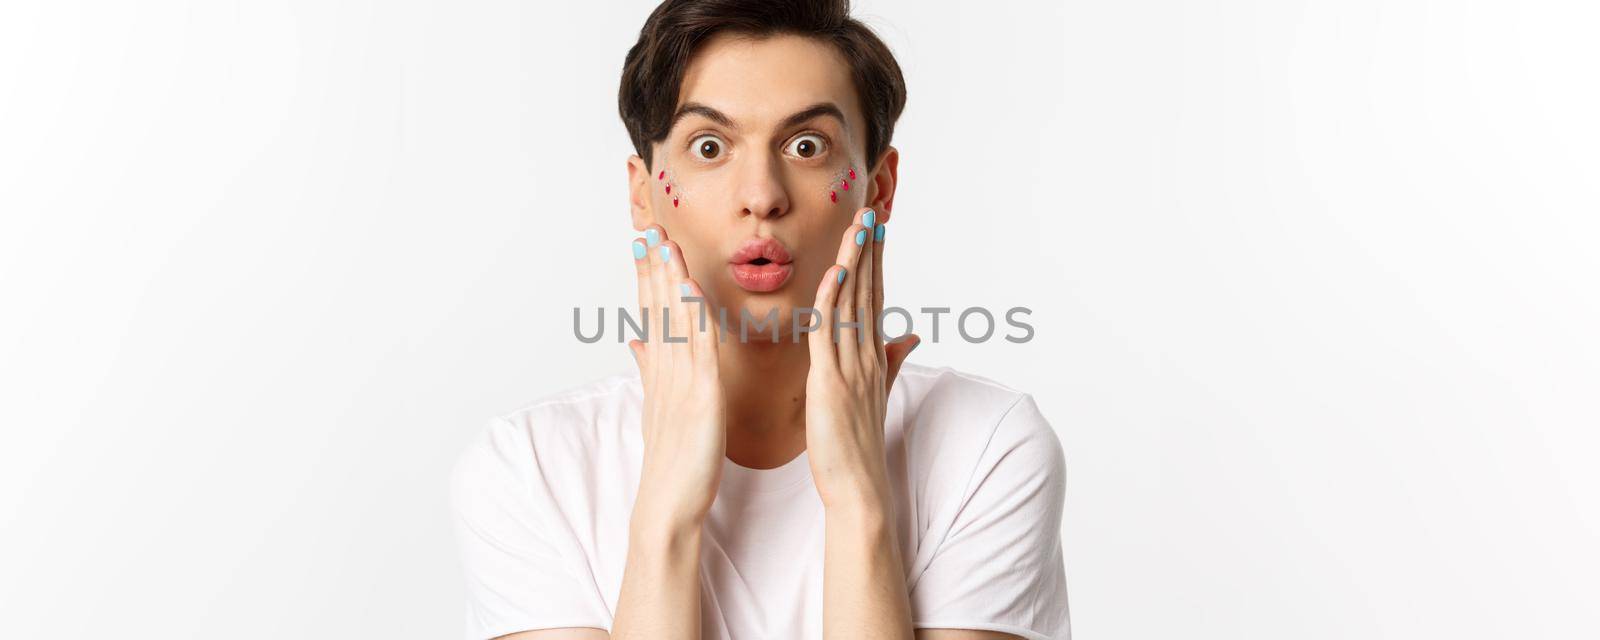 People, lgbtq and beauty concept. Close-up of handsome gay man express surprise, showing hands with blue nail polish, standing over white background.